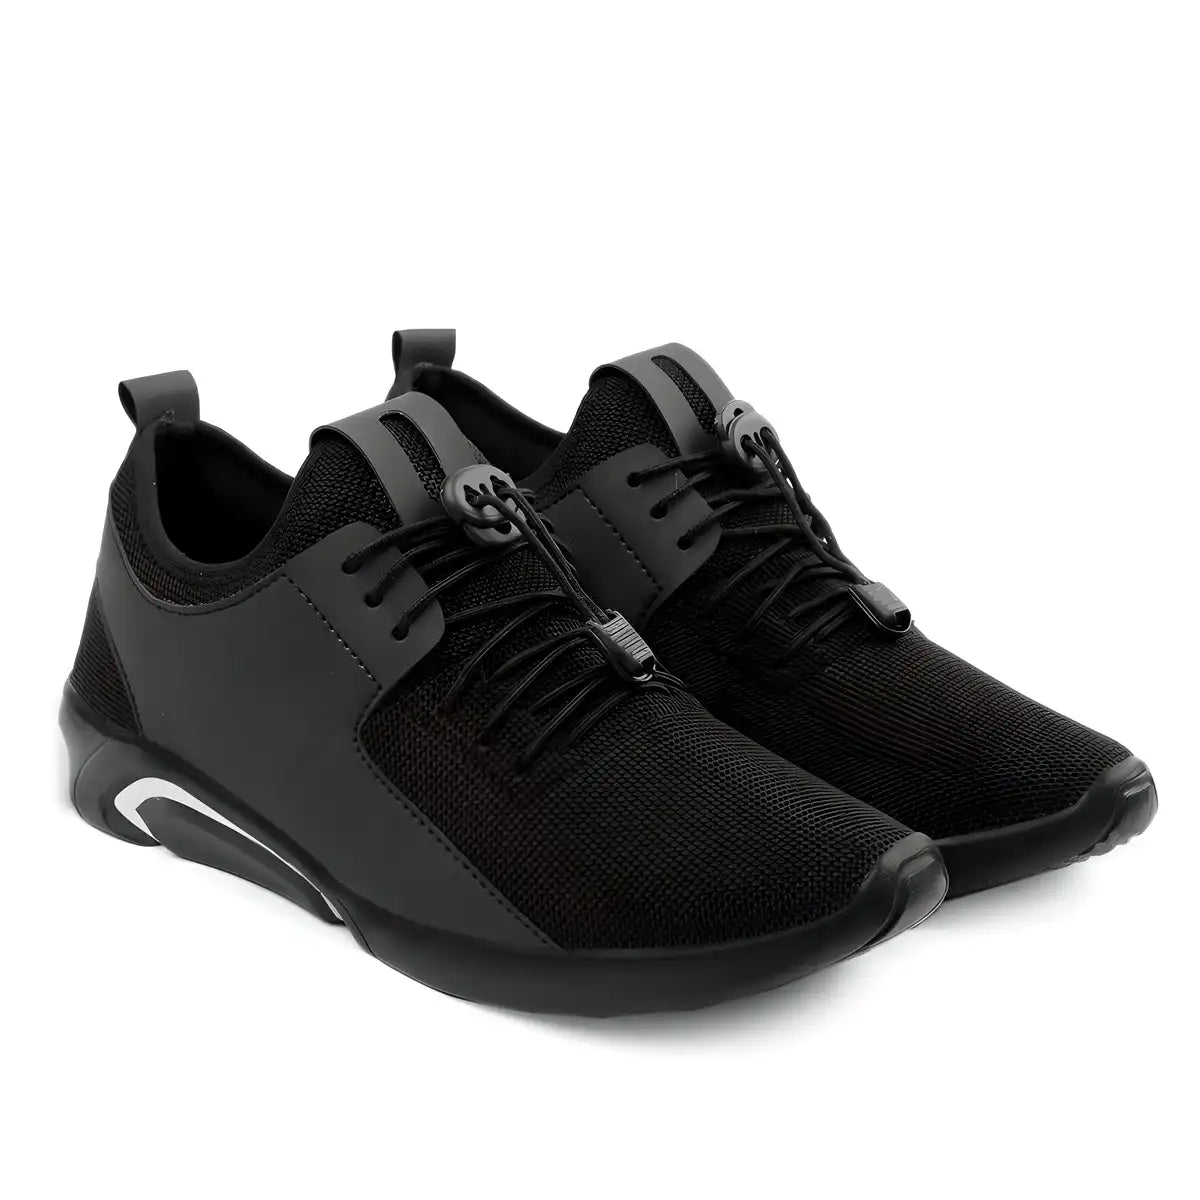 (HIGH RETURNS/ DON'T MAKE LIVE) Shoe Island Canvas Mesh Casual Wear Lace Ups Walking Running Training Gym Football Sports Sneakers